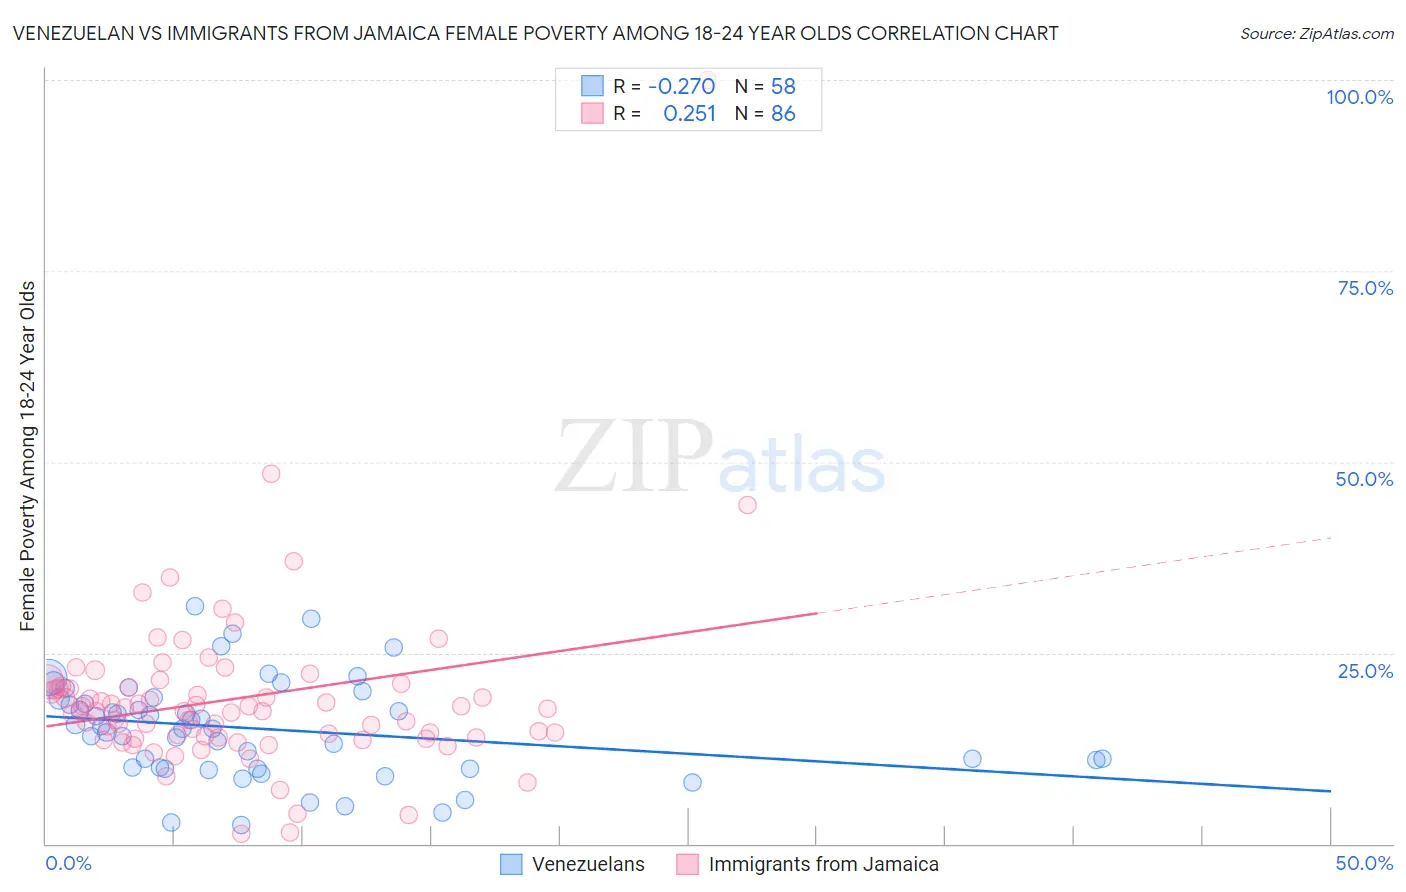 Venezuelan vs Immigrants from Jamaica Female Poverty Among 18-24 Year Olds